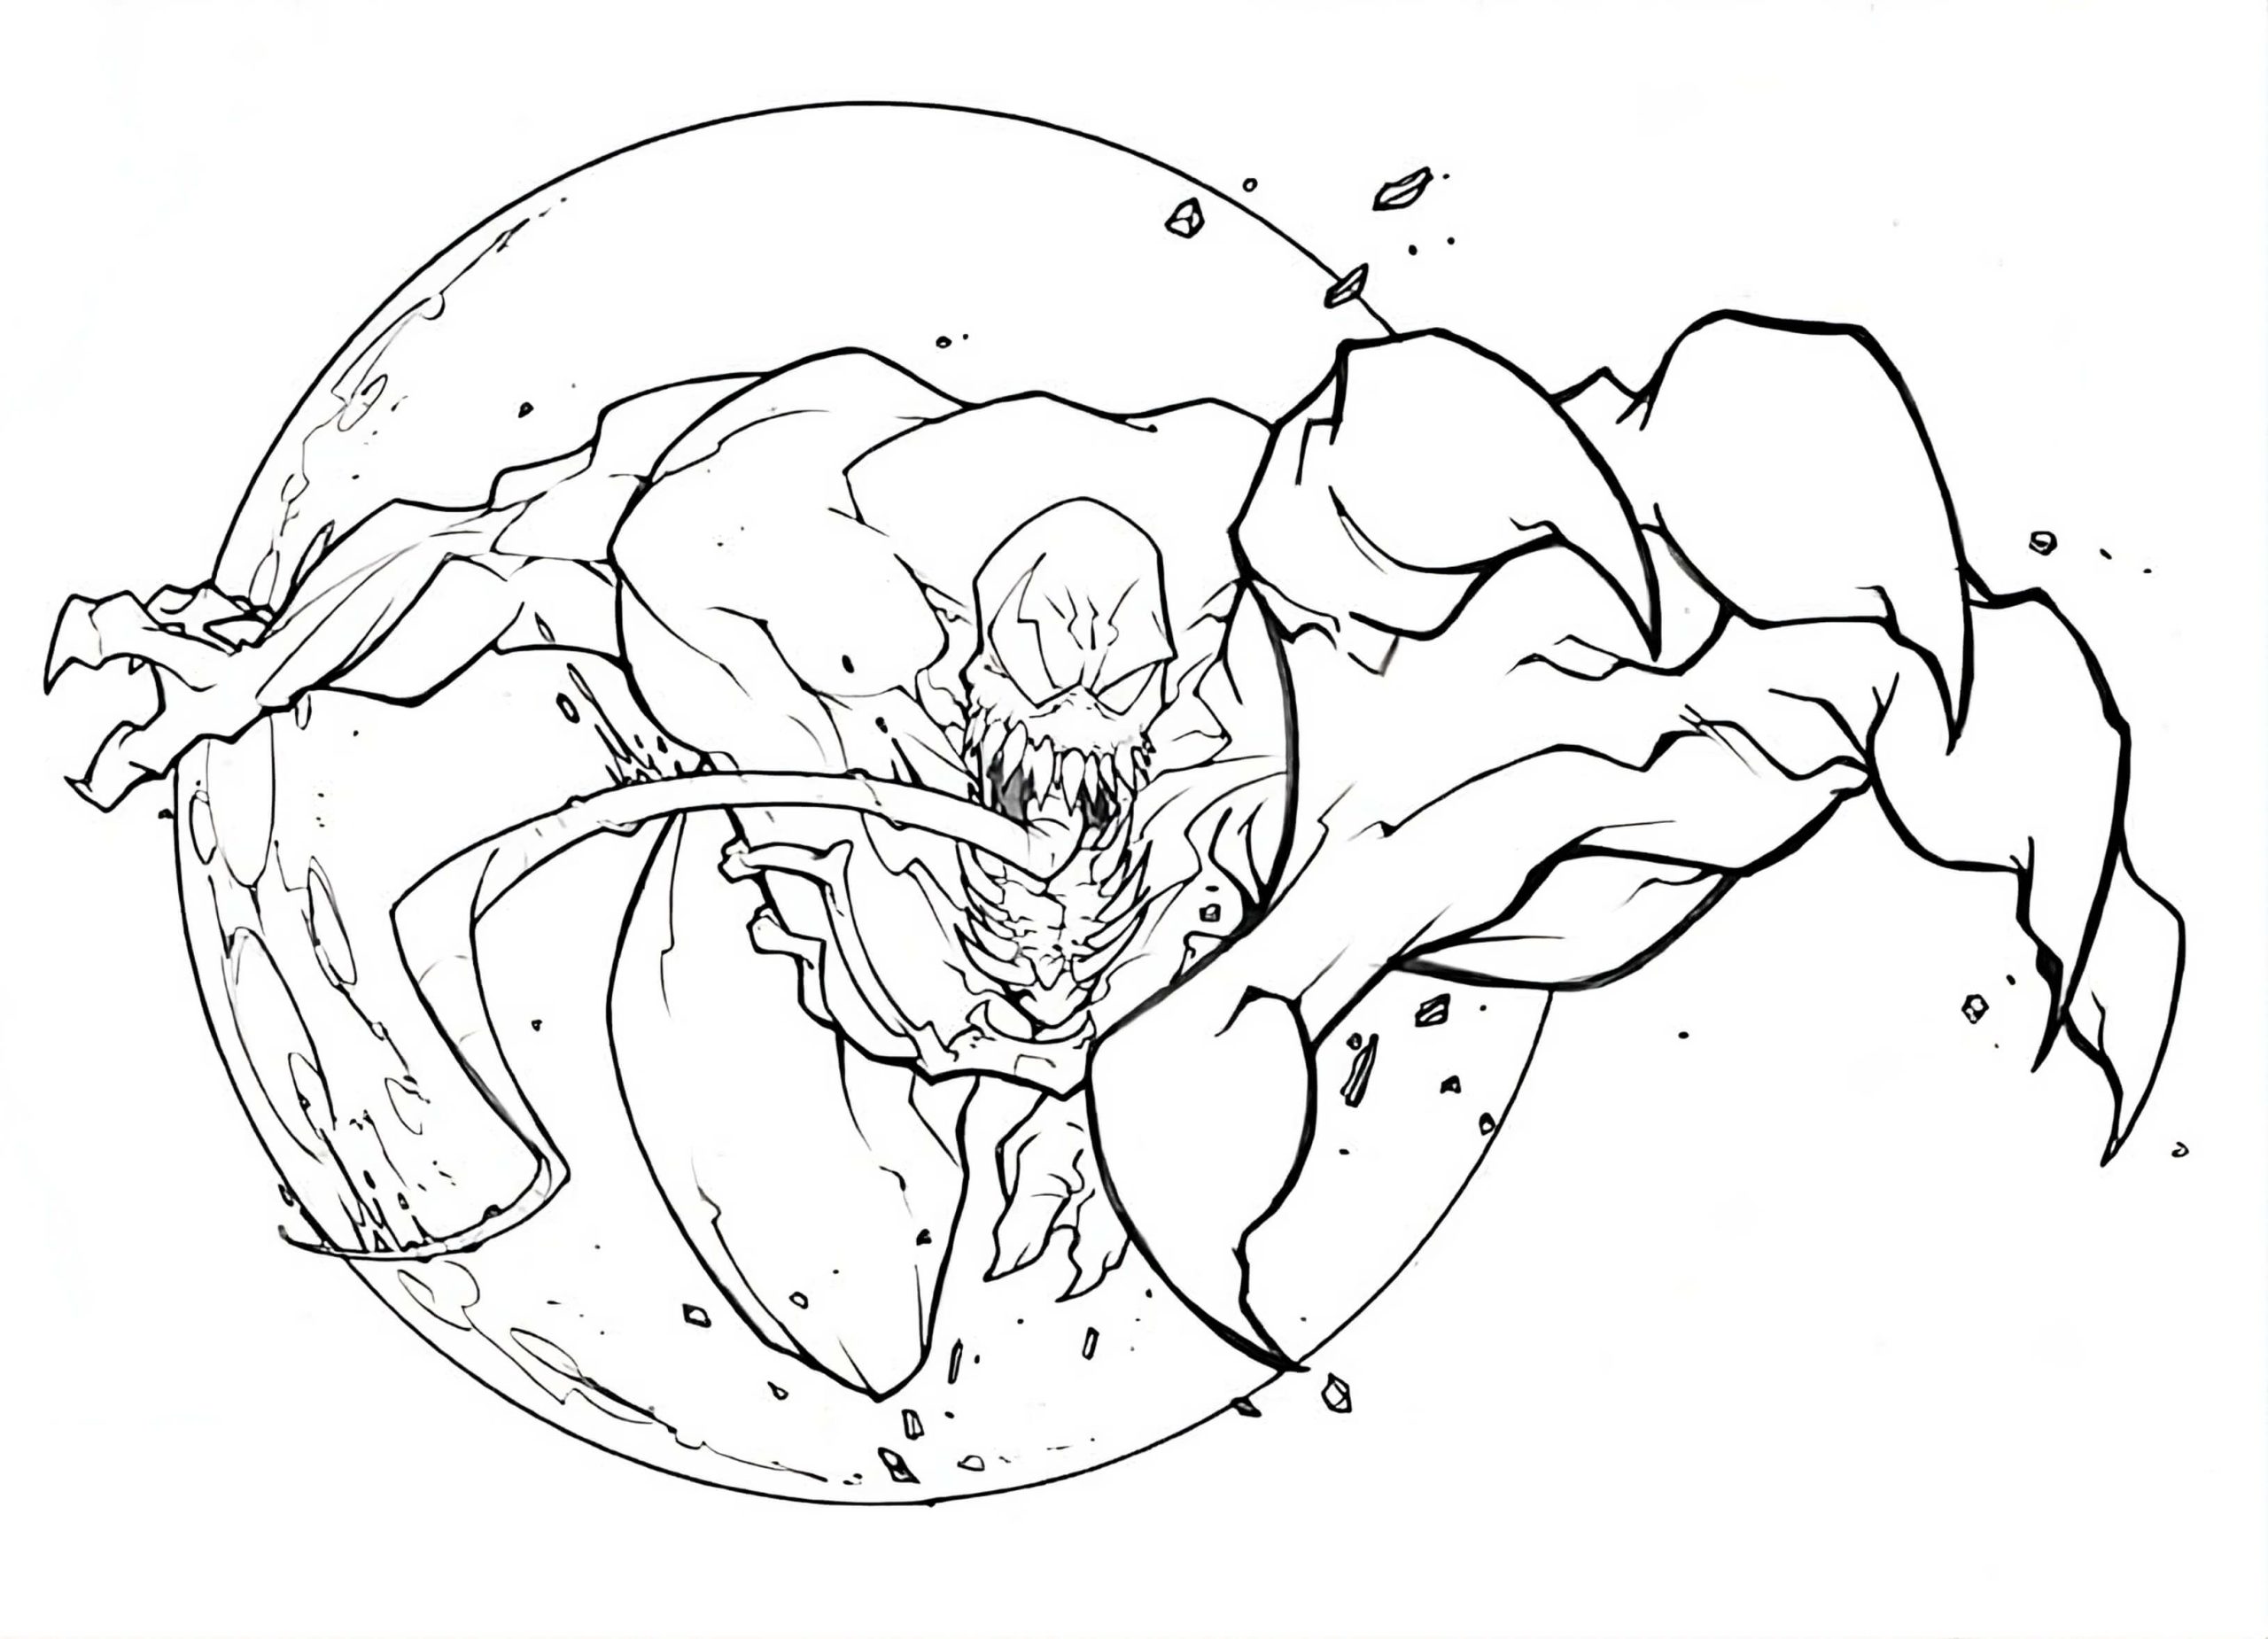 Venom is Anry Coloring Pages